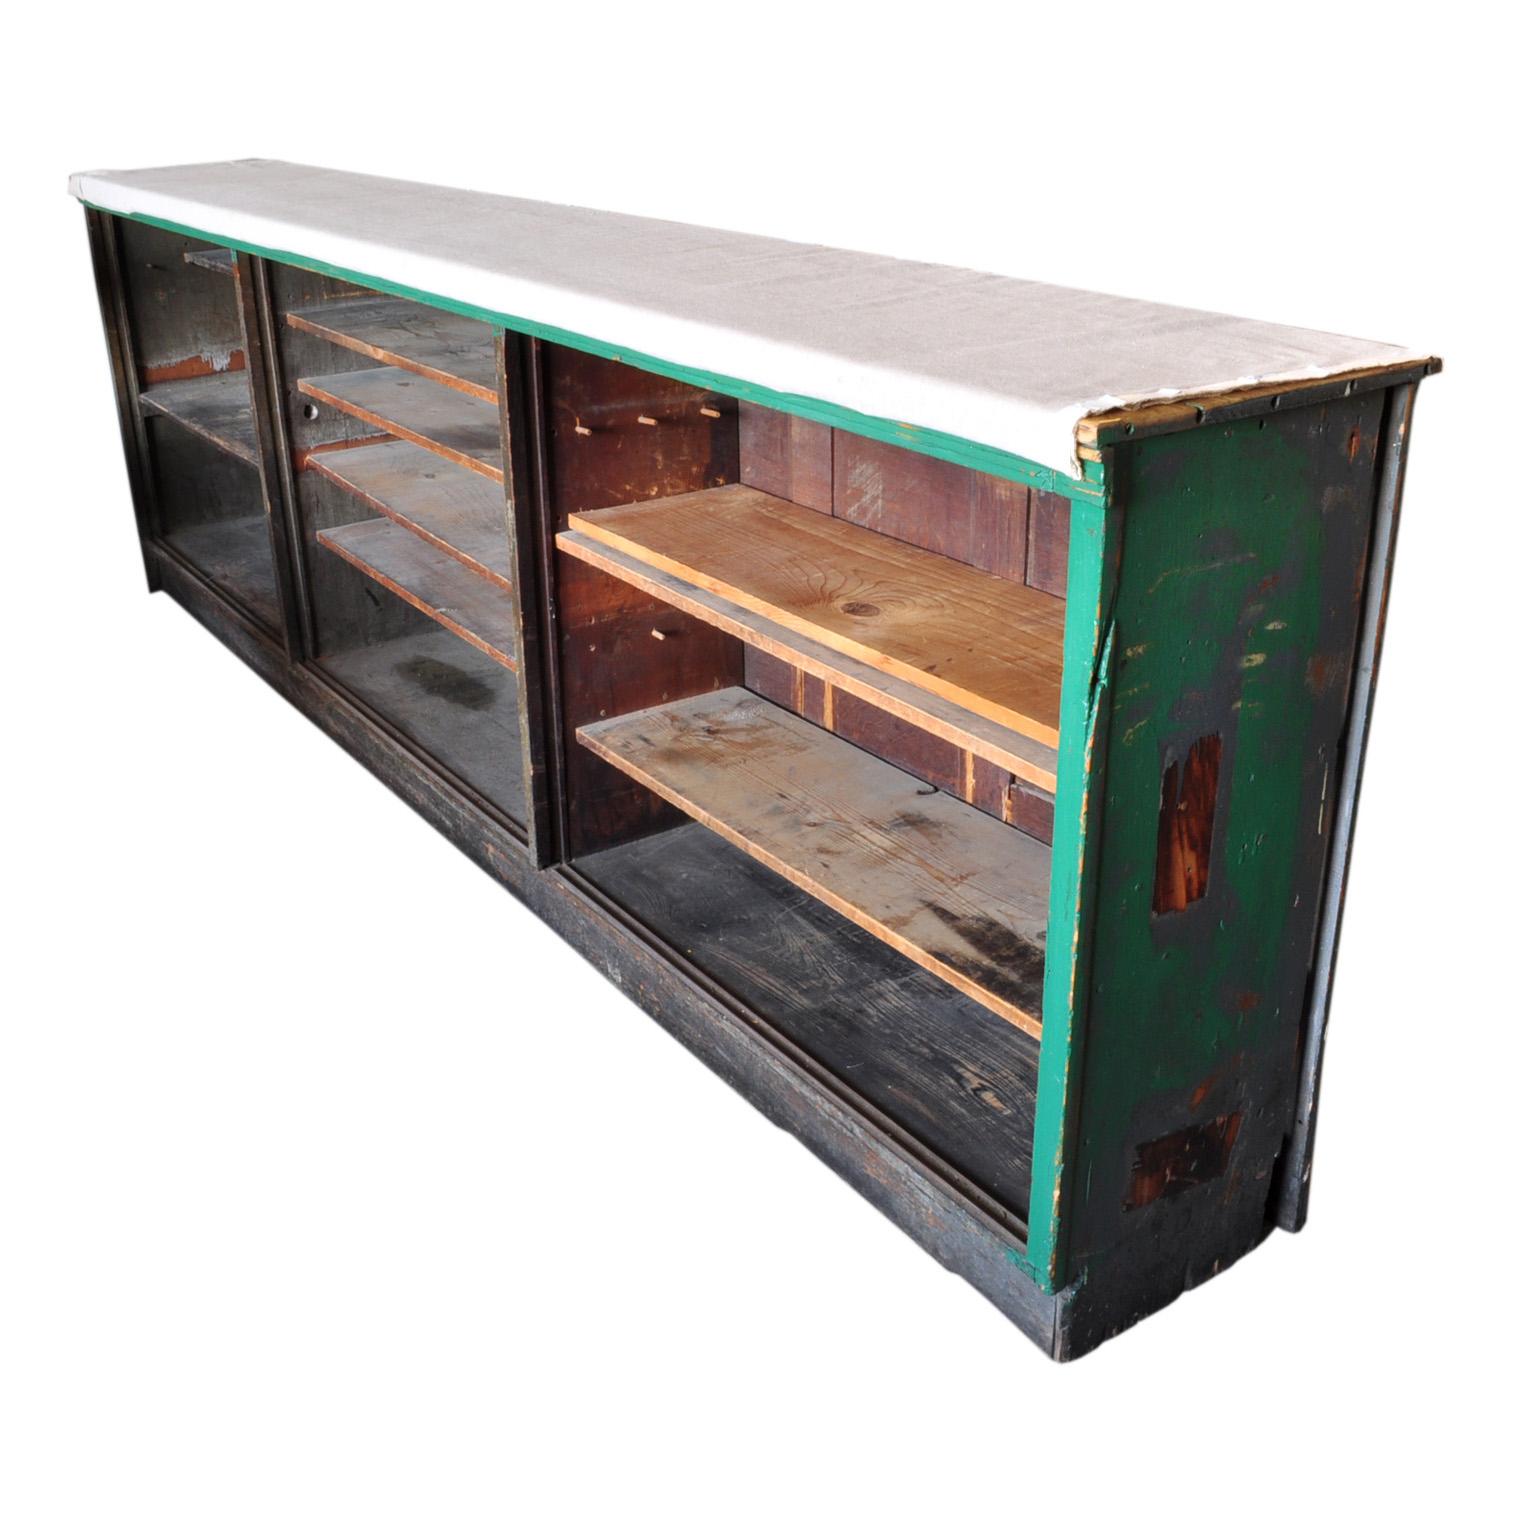 The counter's roomy shelving areas offers a generous storage and display room, designed with versatility in mind. This counter graciously accommodates an array of items, from vintage treasures and collectibles to your everyday essentials, rendering